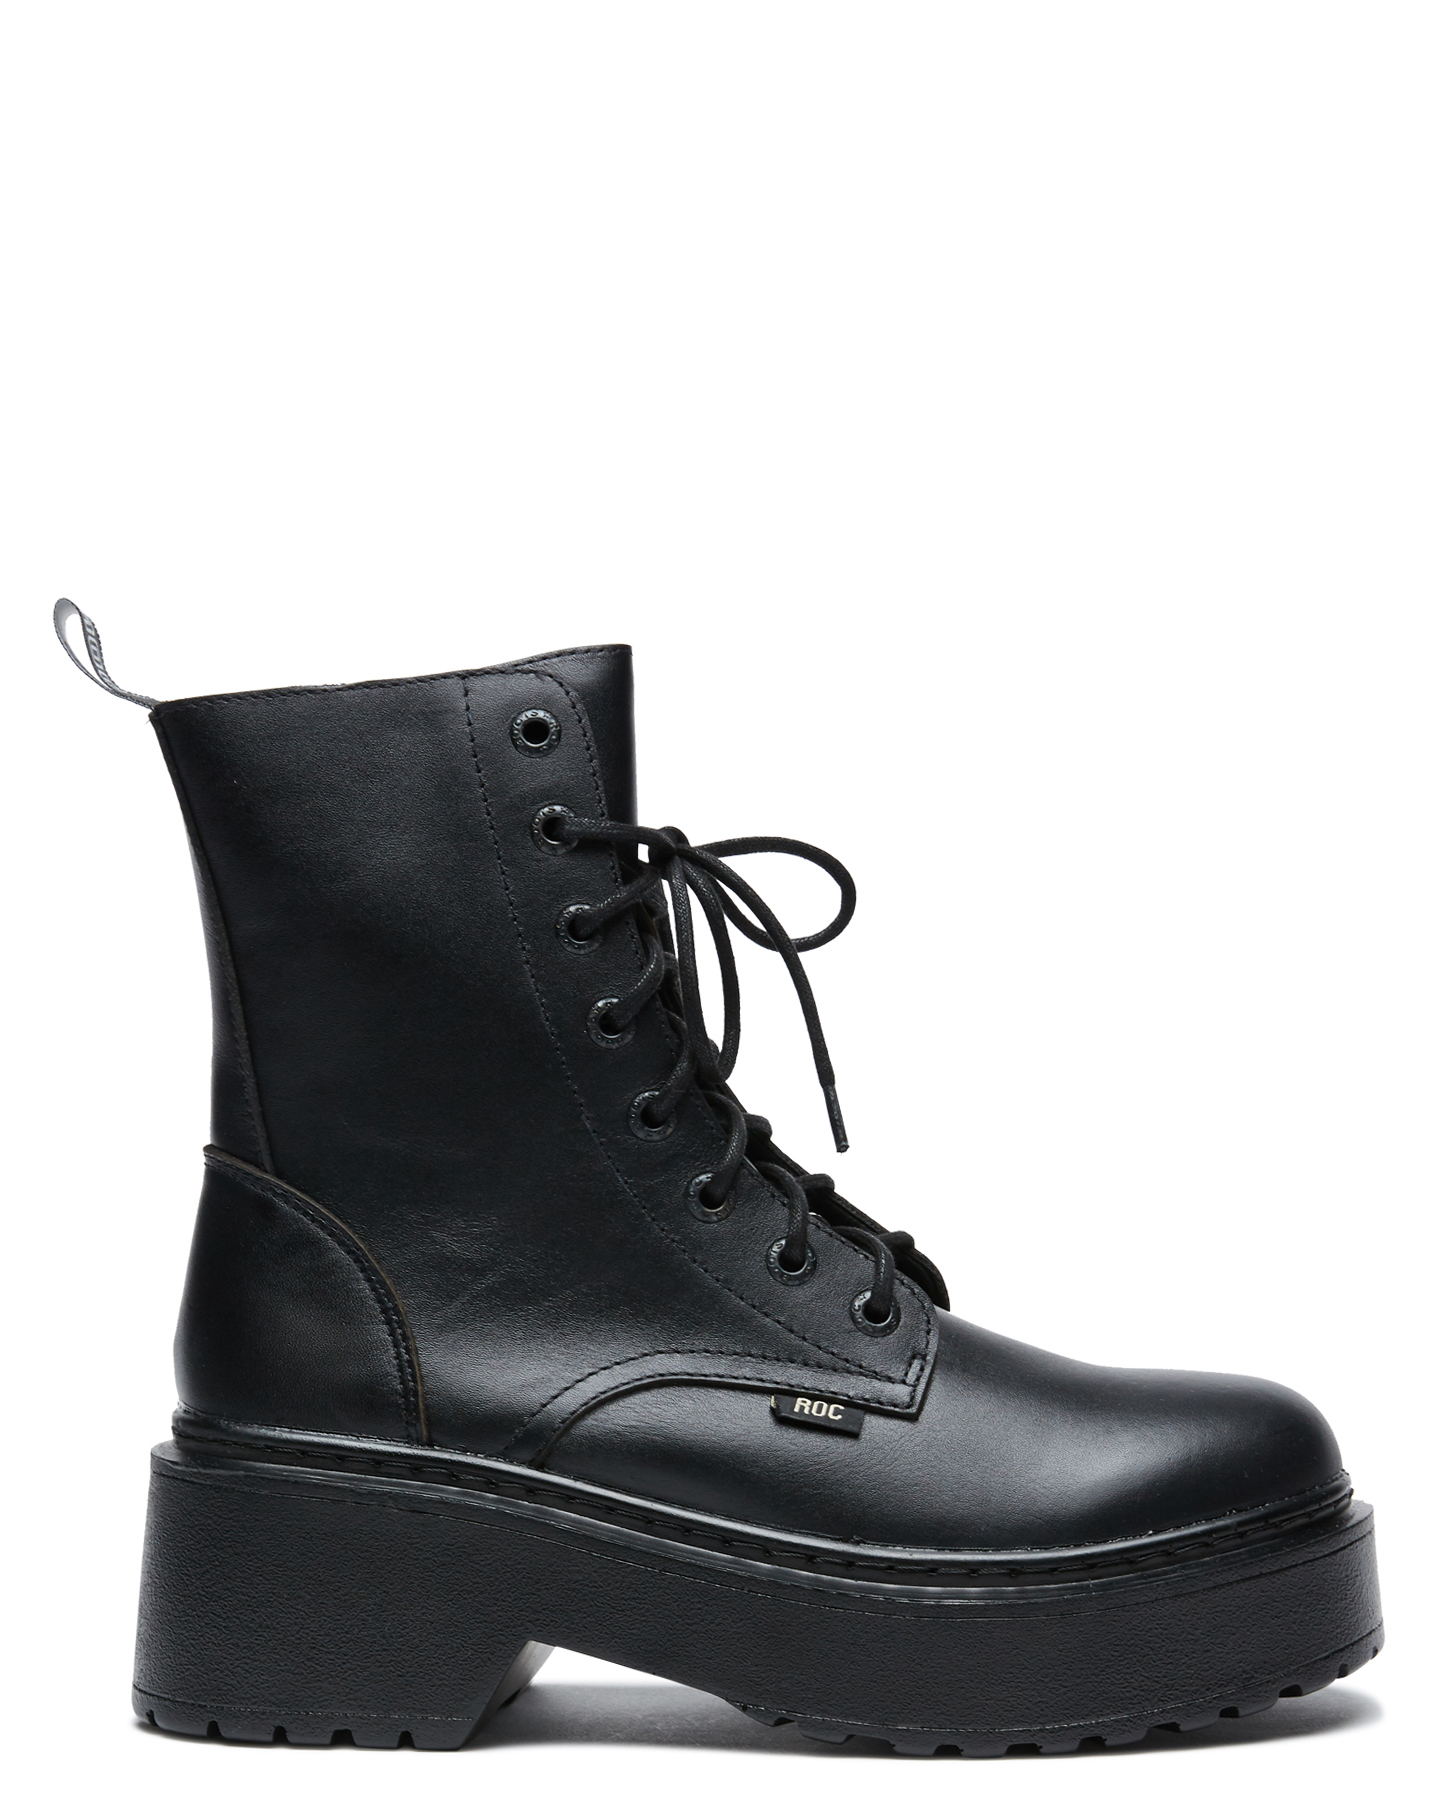 Roc Boots Womens Tomboy Boot - Black Leather | SurfStitch